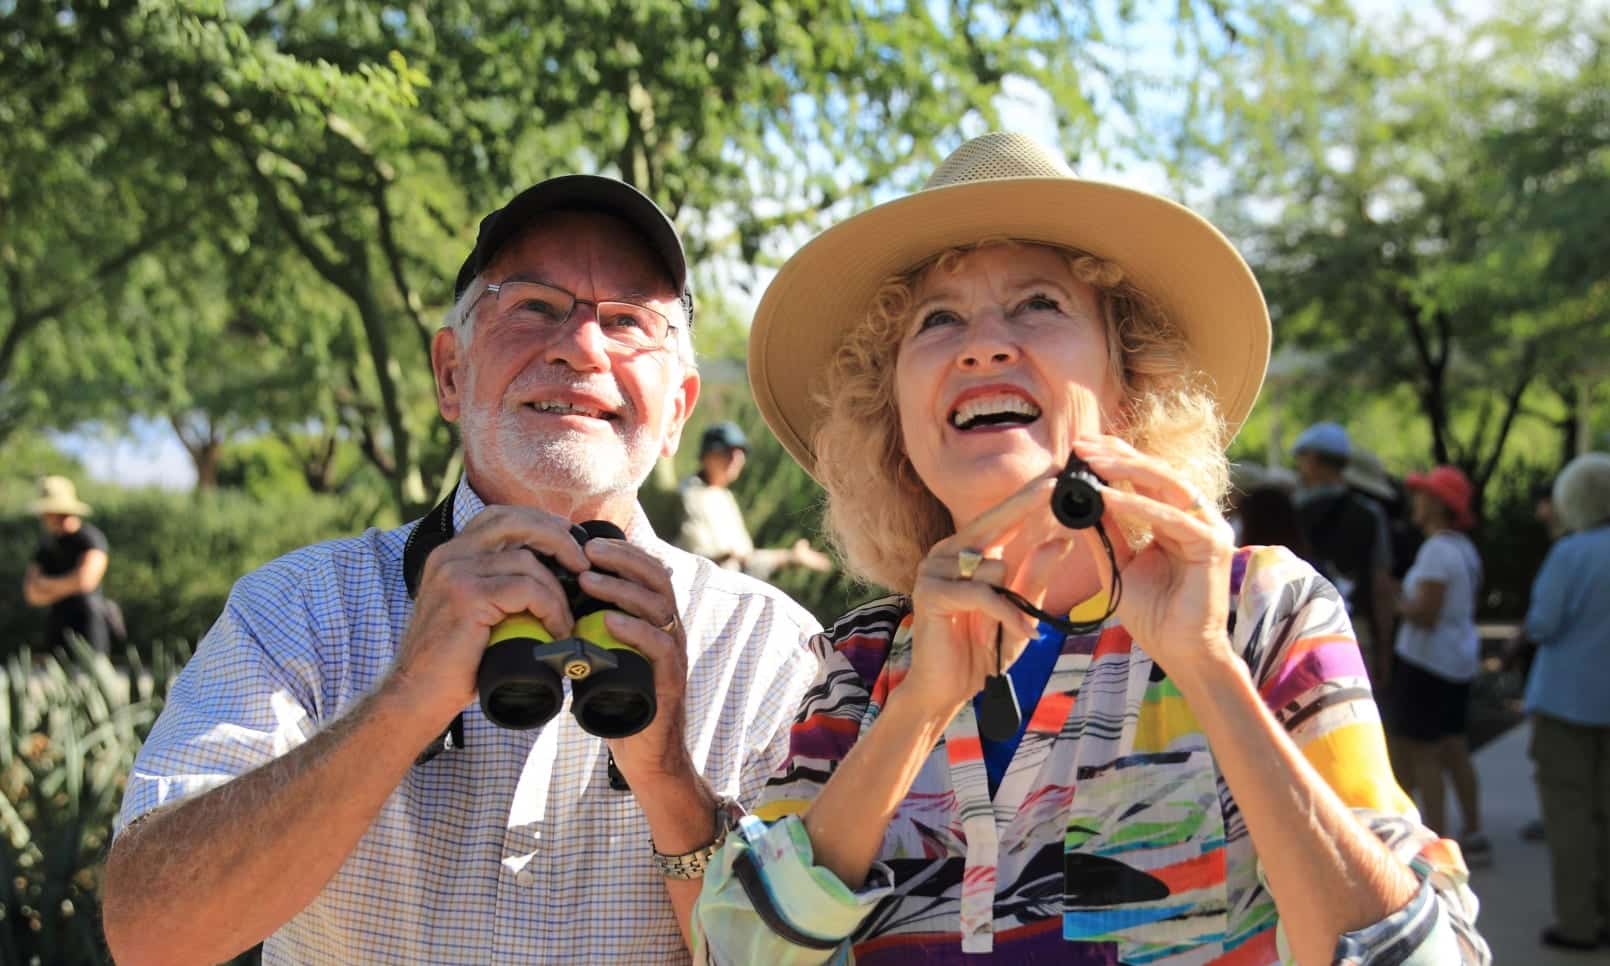 An older couple outdoors smiling with binoculars, the man wearing a cap and the woman in a sunhat, with other people and greenery in the background.